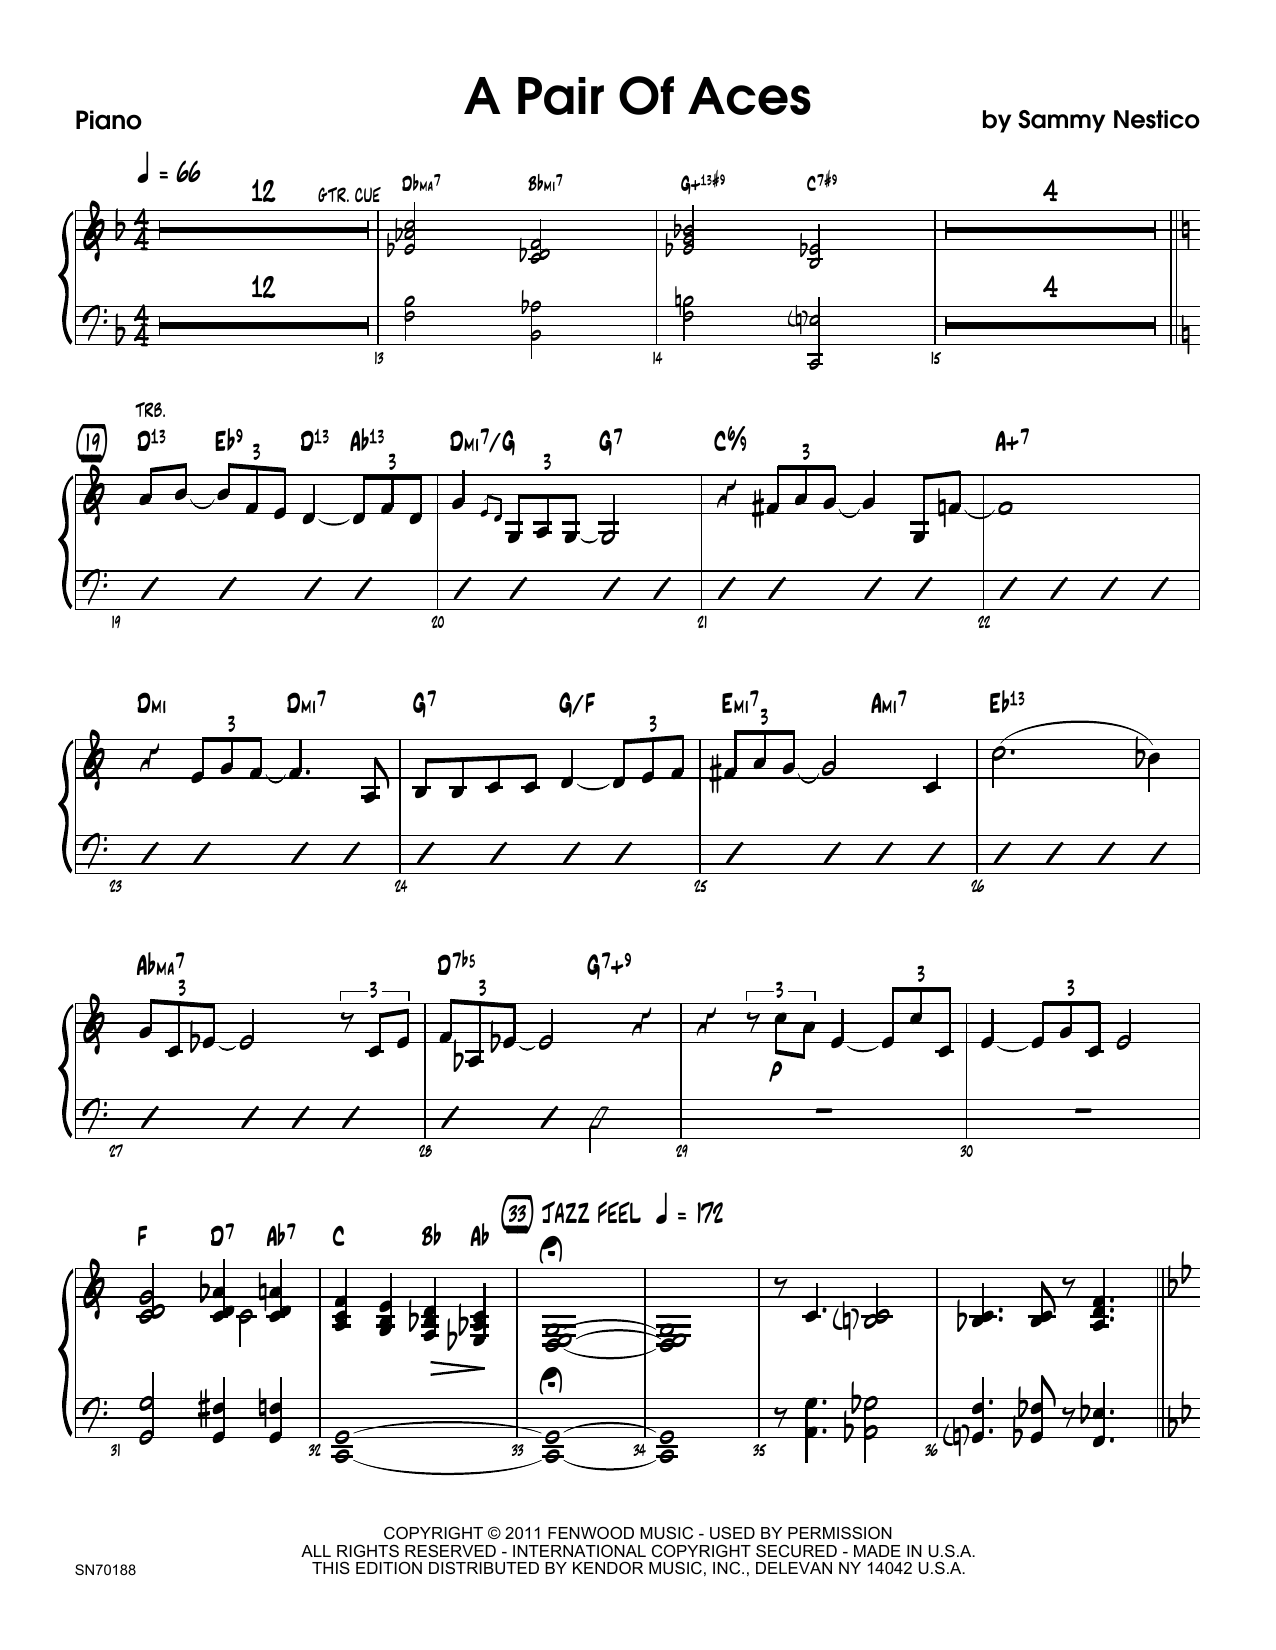 Download Sammy Nestico A Pair Of Aces - Piano Sheet Music